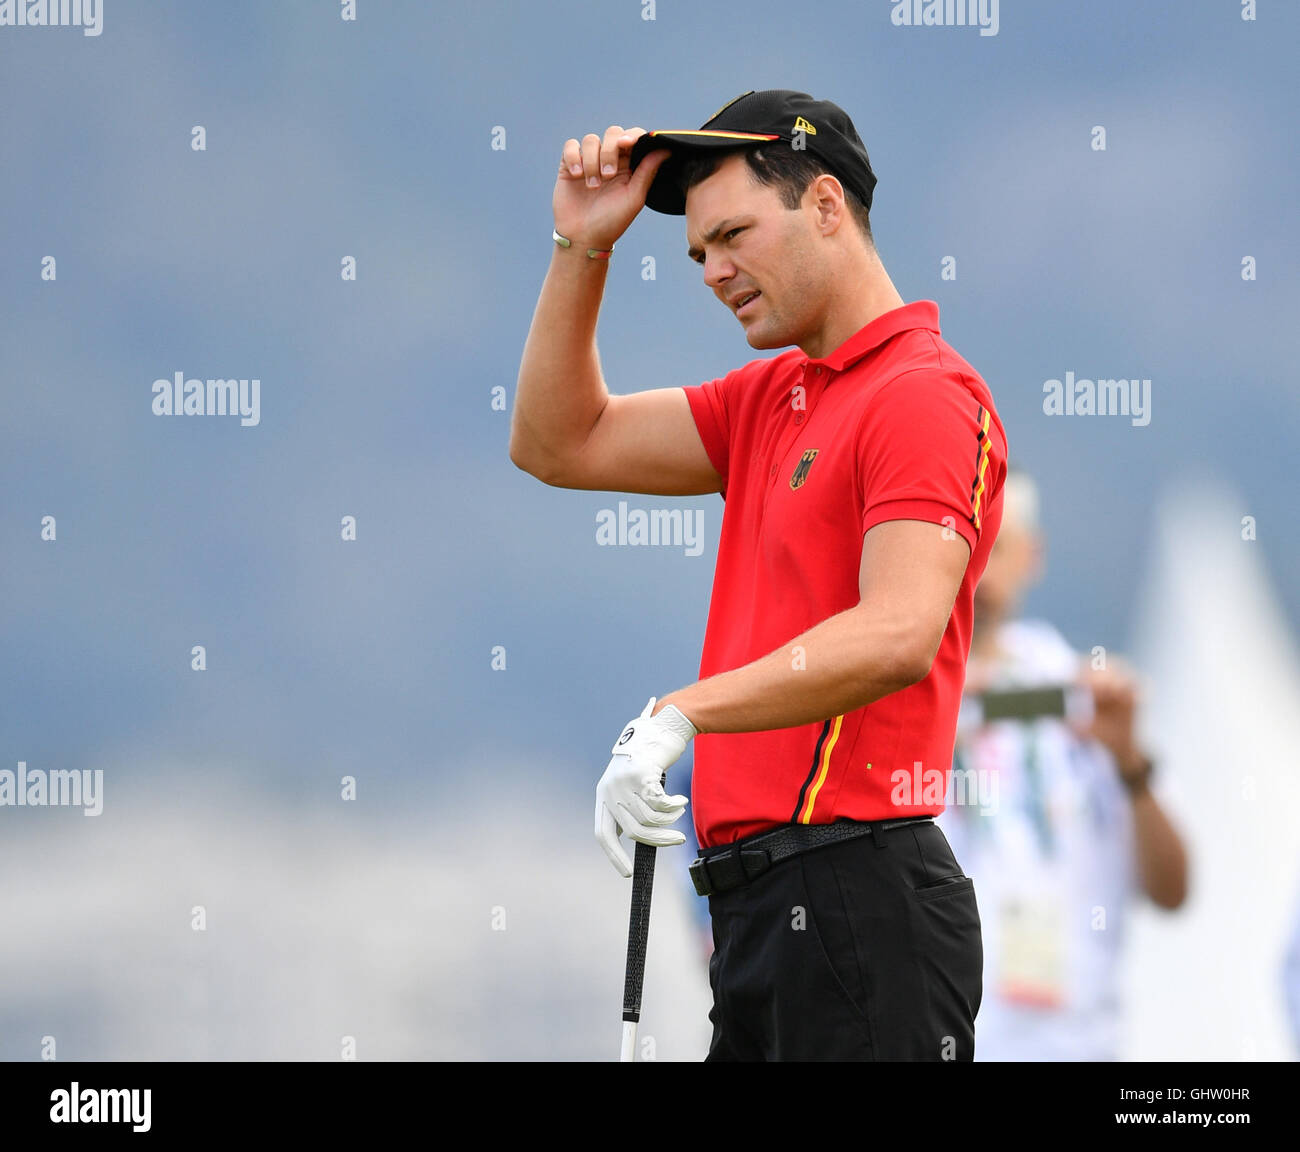 Rio de Janeiro, Brazil. 11th Aug, 2016. Martin Kaymer of Germany competes in the Men's Individual Stroke Play Round 1 of the Golf events during the Olympic Games at the Olympic Golf Course in Rio de Janeiro, Brazil, 11 August 2016. Photo: Lukas Schulze/dpa/Alamy Live News Stock Photo